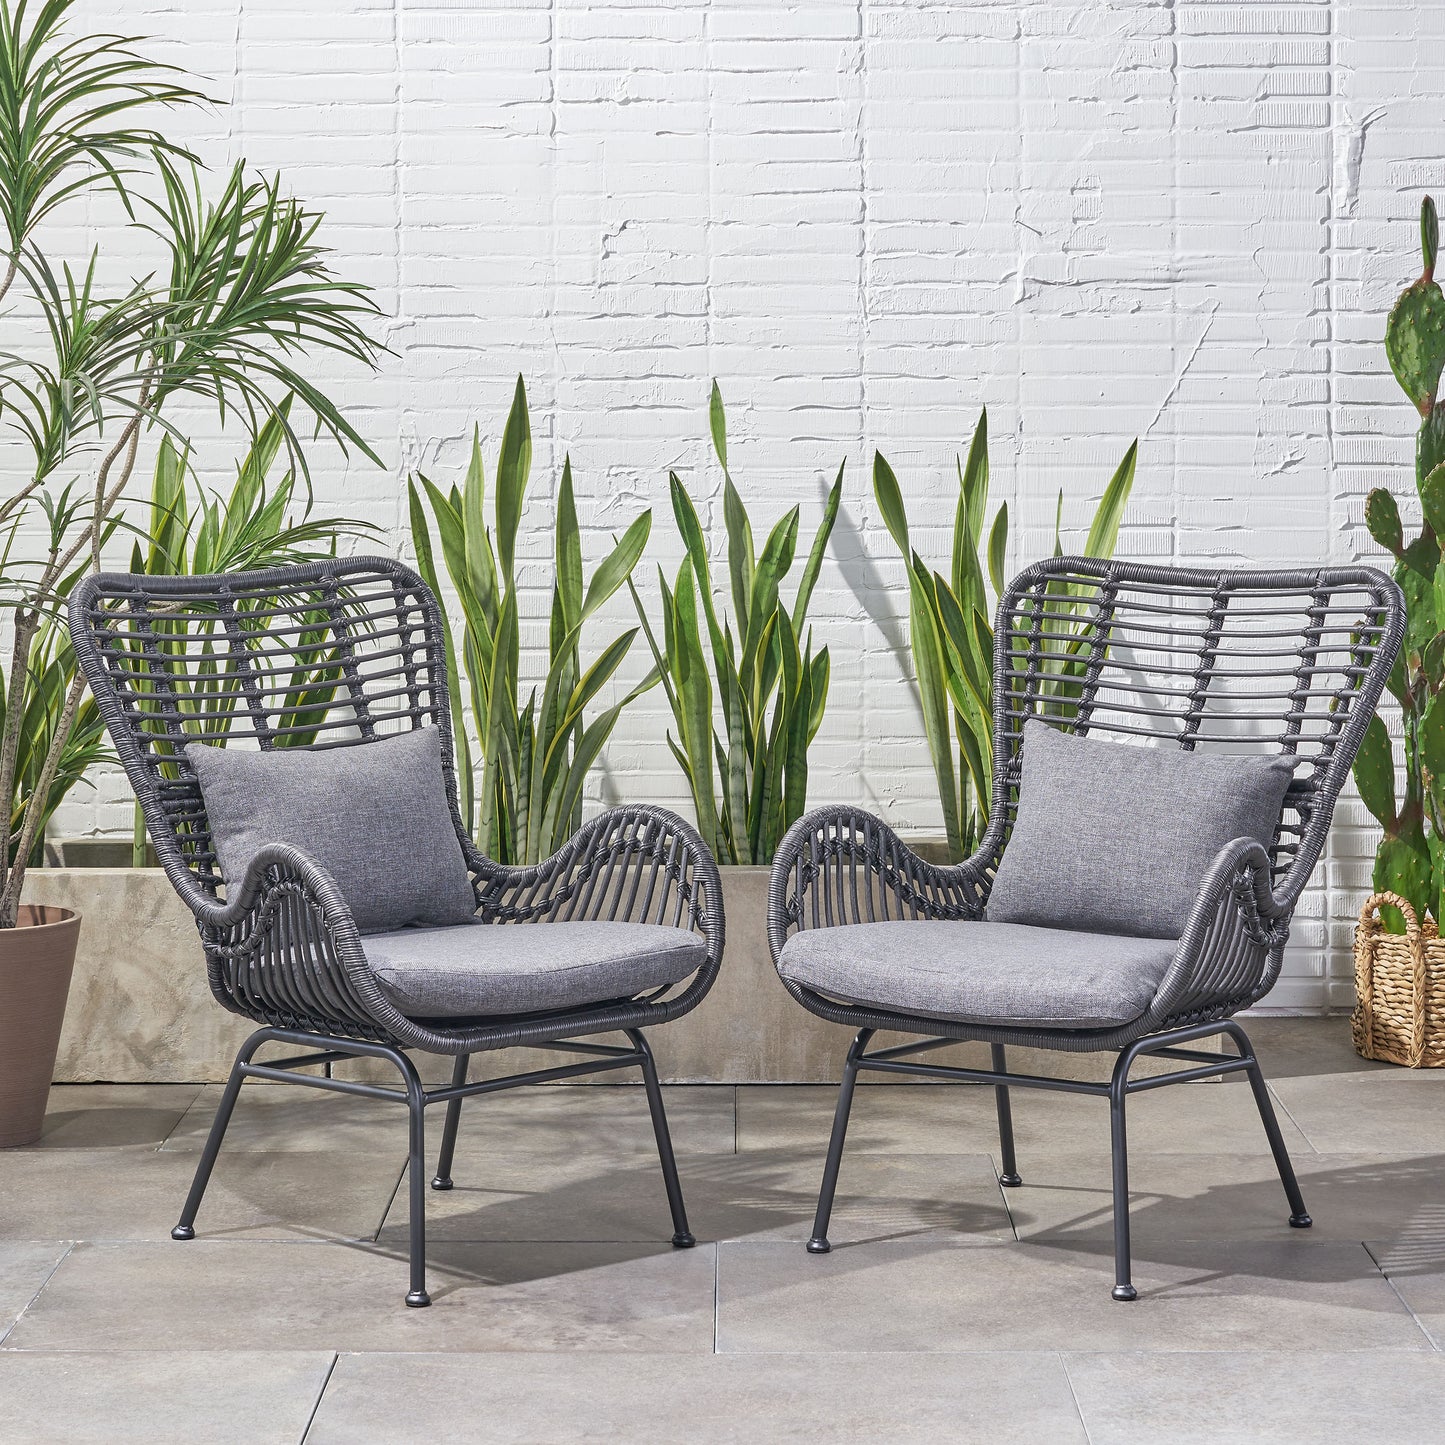 Pooneli Outdoor Wicker Club Chairs with Cushions (Set of 2)